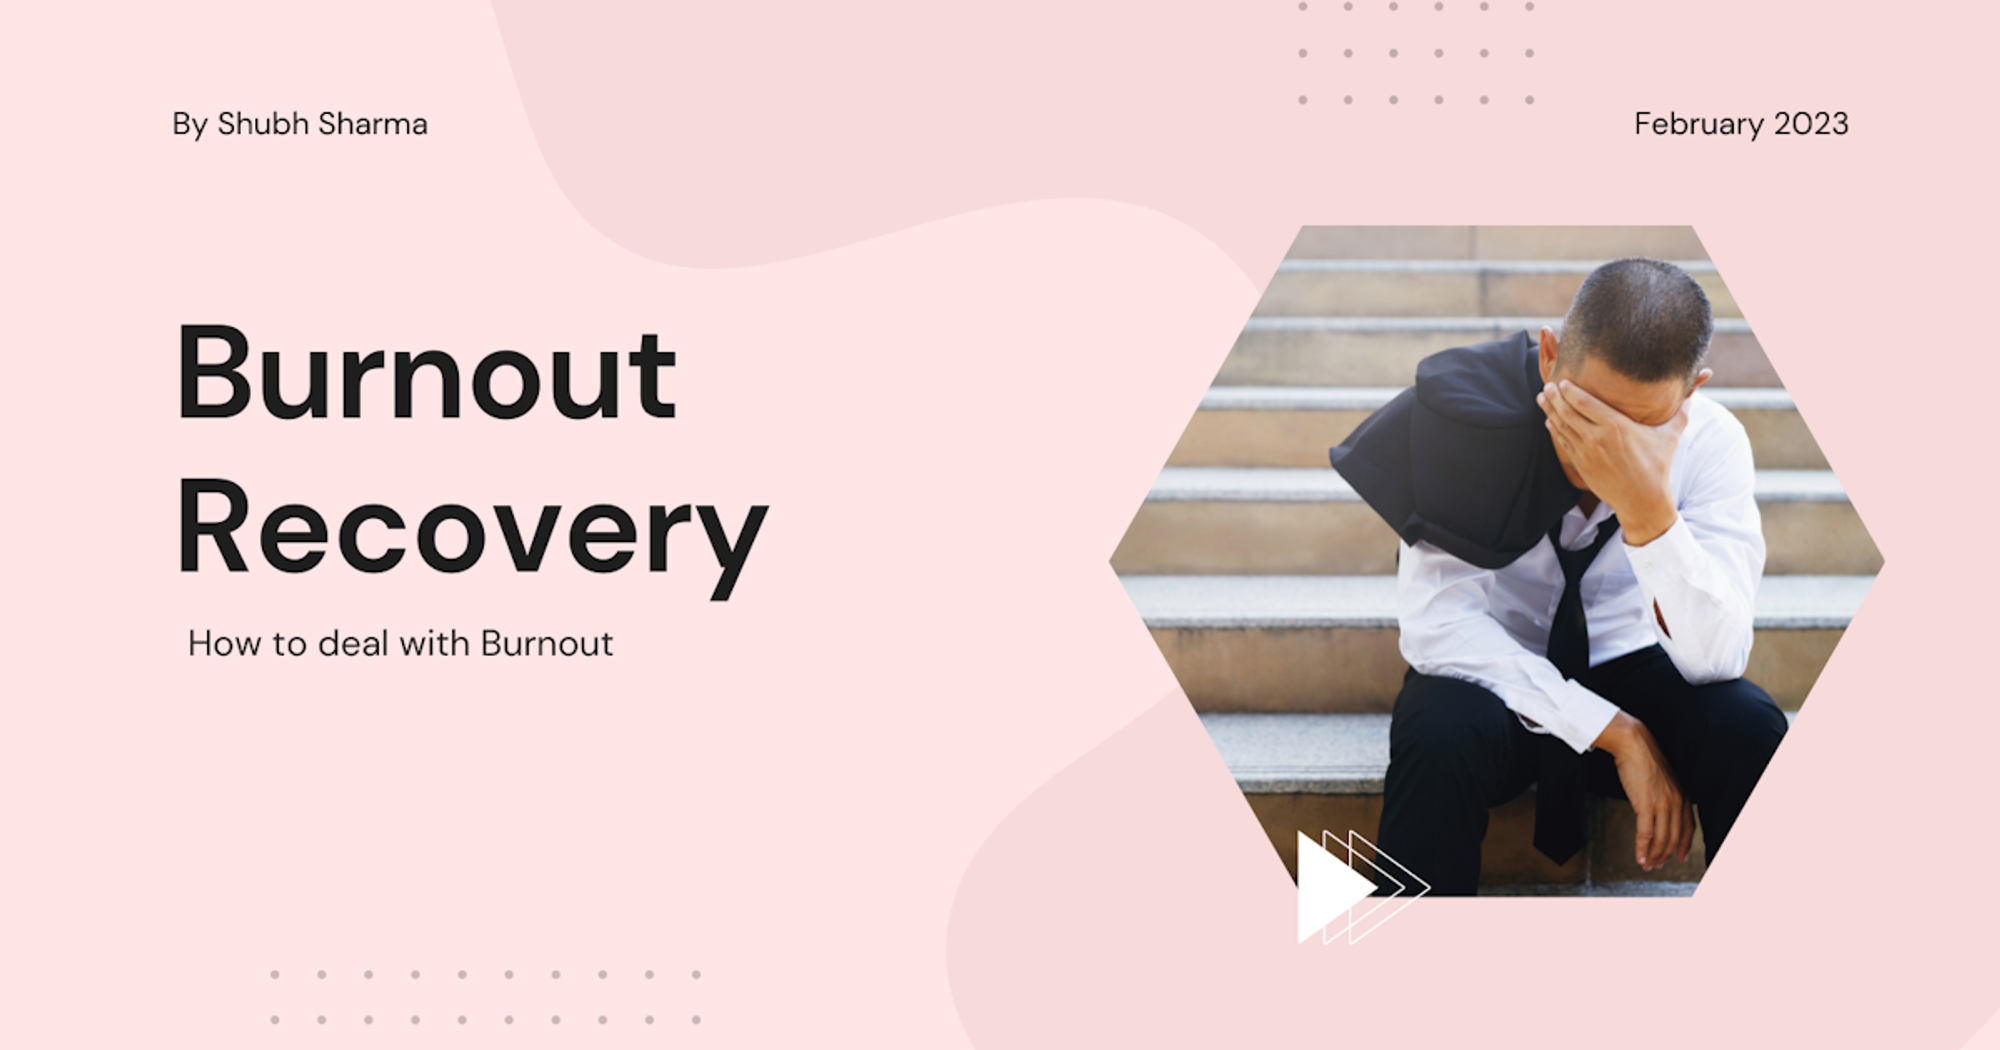 The Road to Burnout Recovery